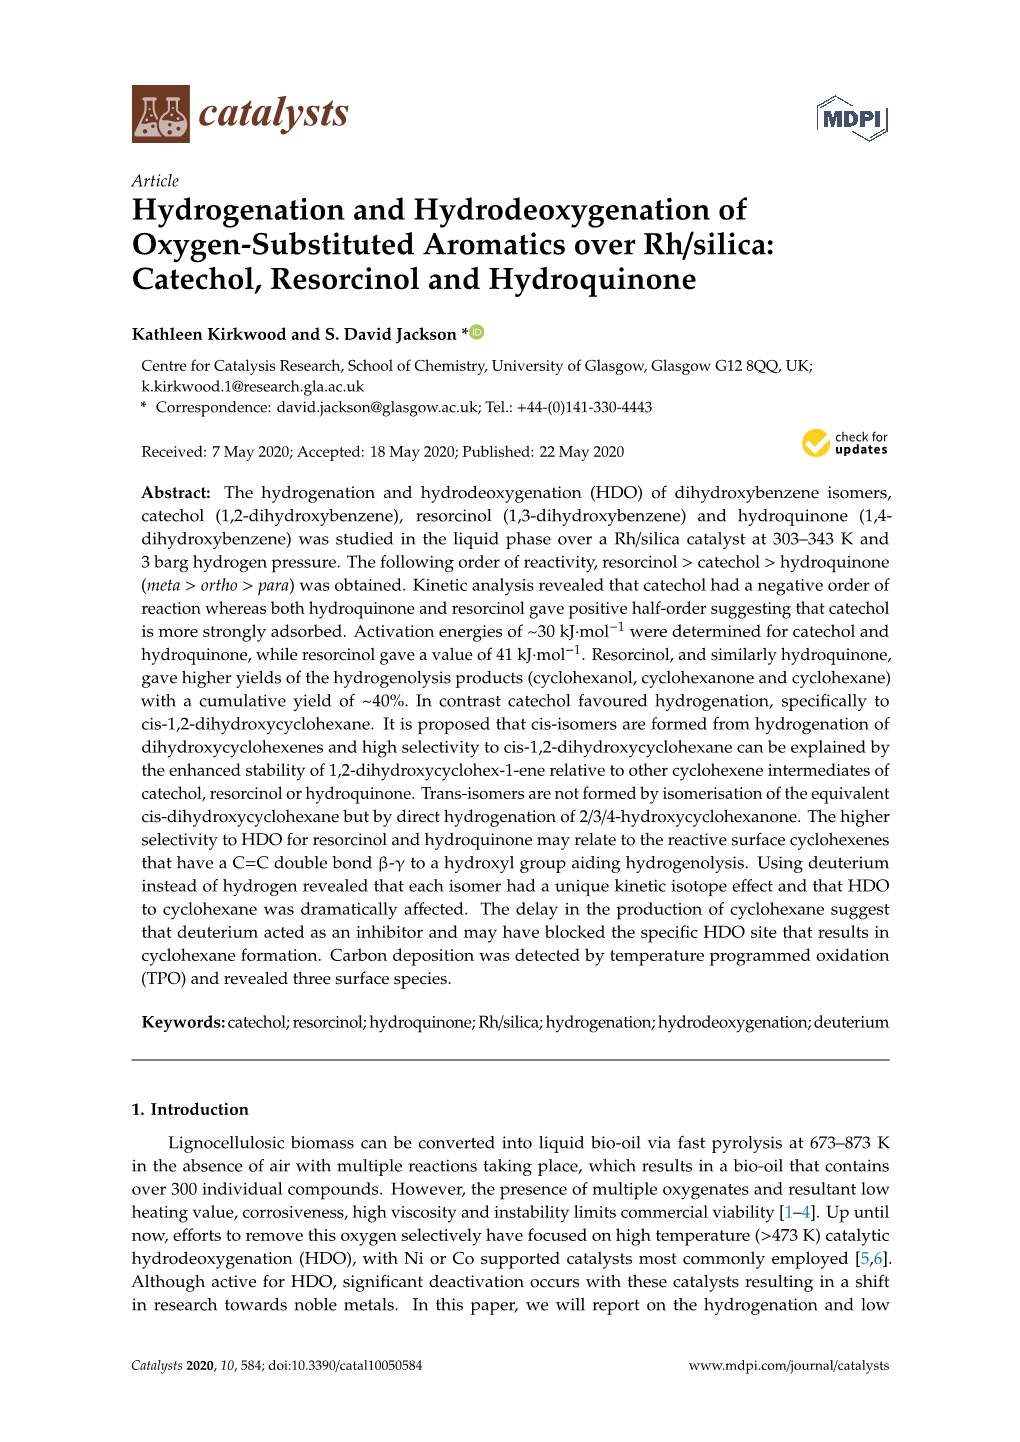 Hydrogenation and Hydrodeoxygenation of Oxygen-Substituted Aromatics Over Rh/Silica: Catechol, Resorcinol and Hydroquinone